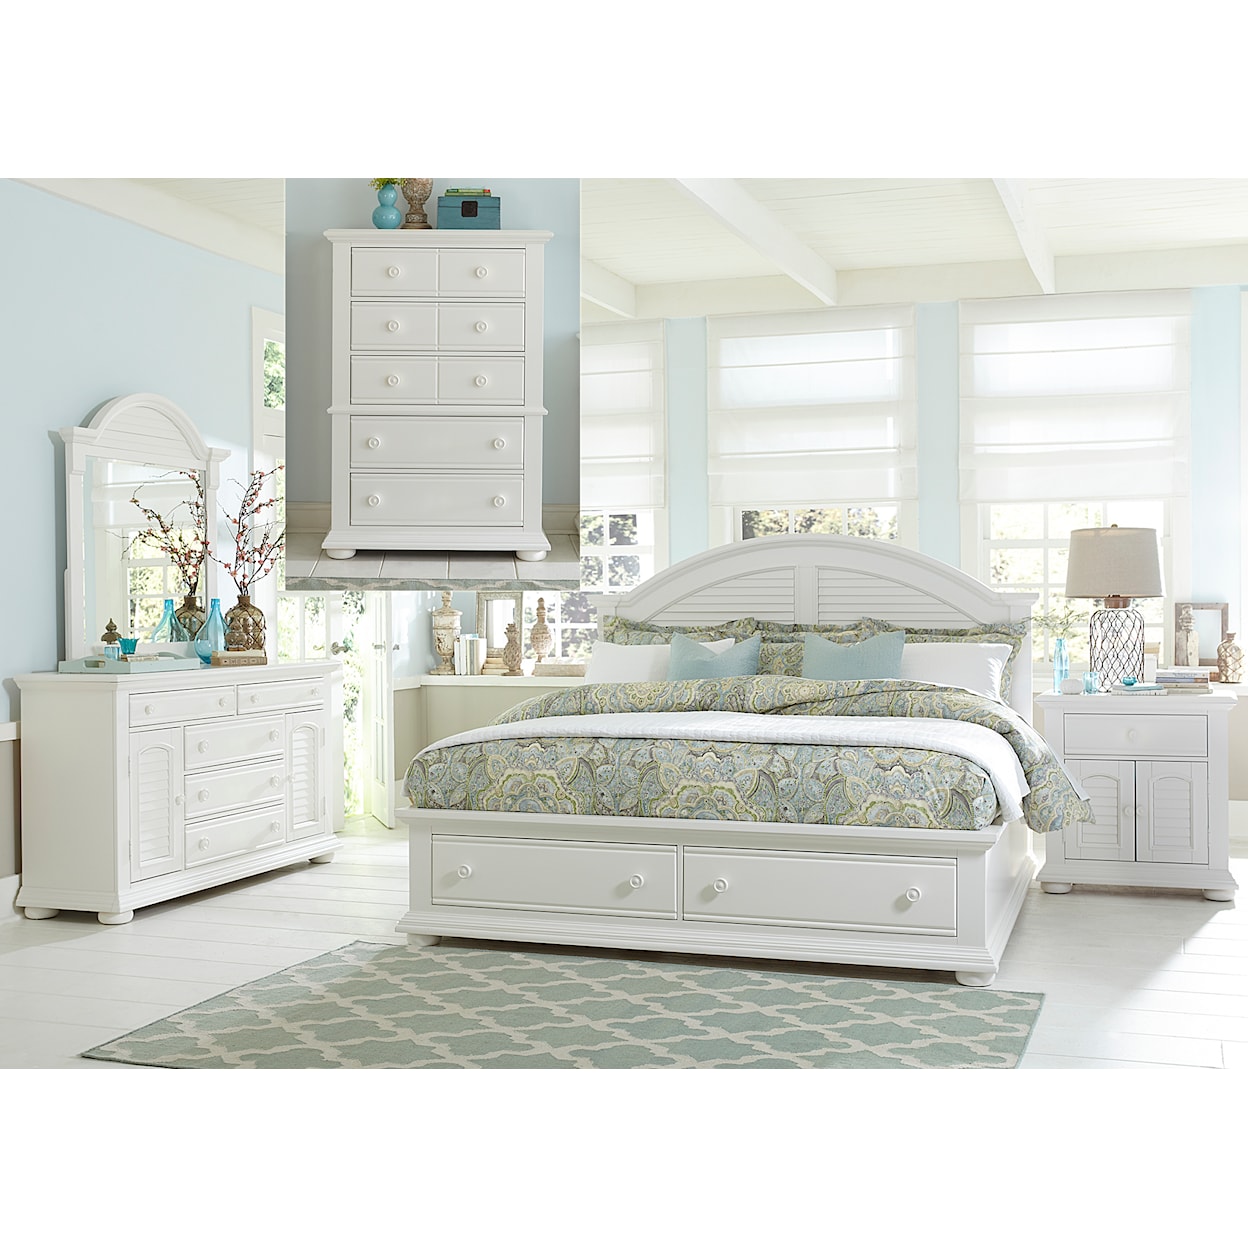 Libby Summer House Queen Bedroom Group